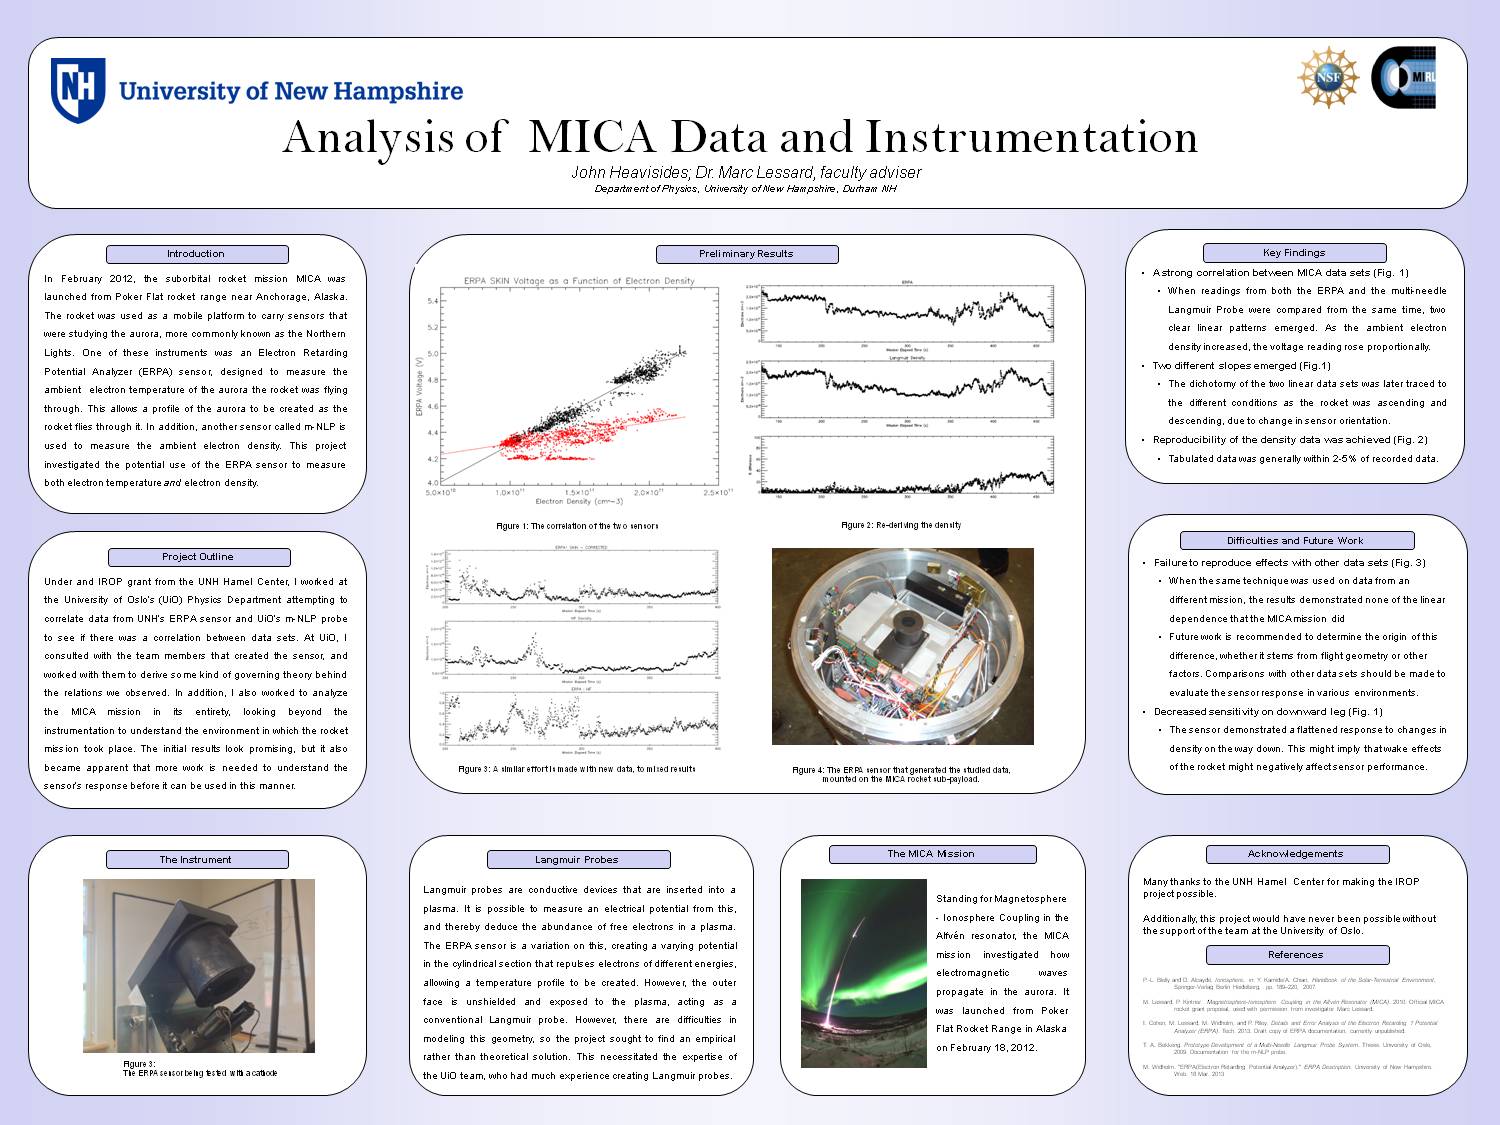 Analysis Of Mica Data And Instrumentation by jheavisides